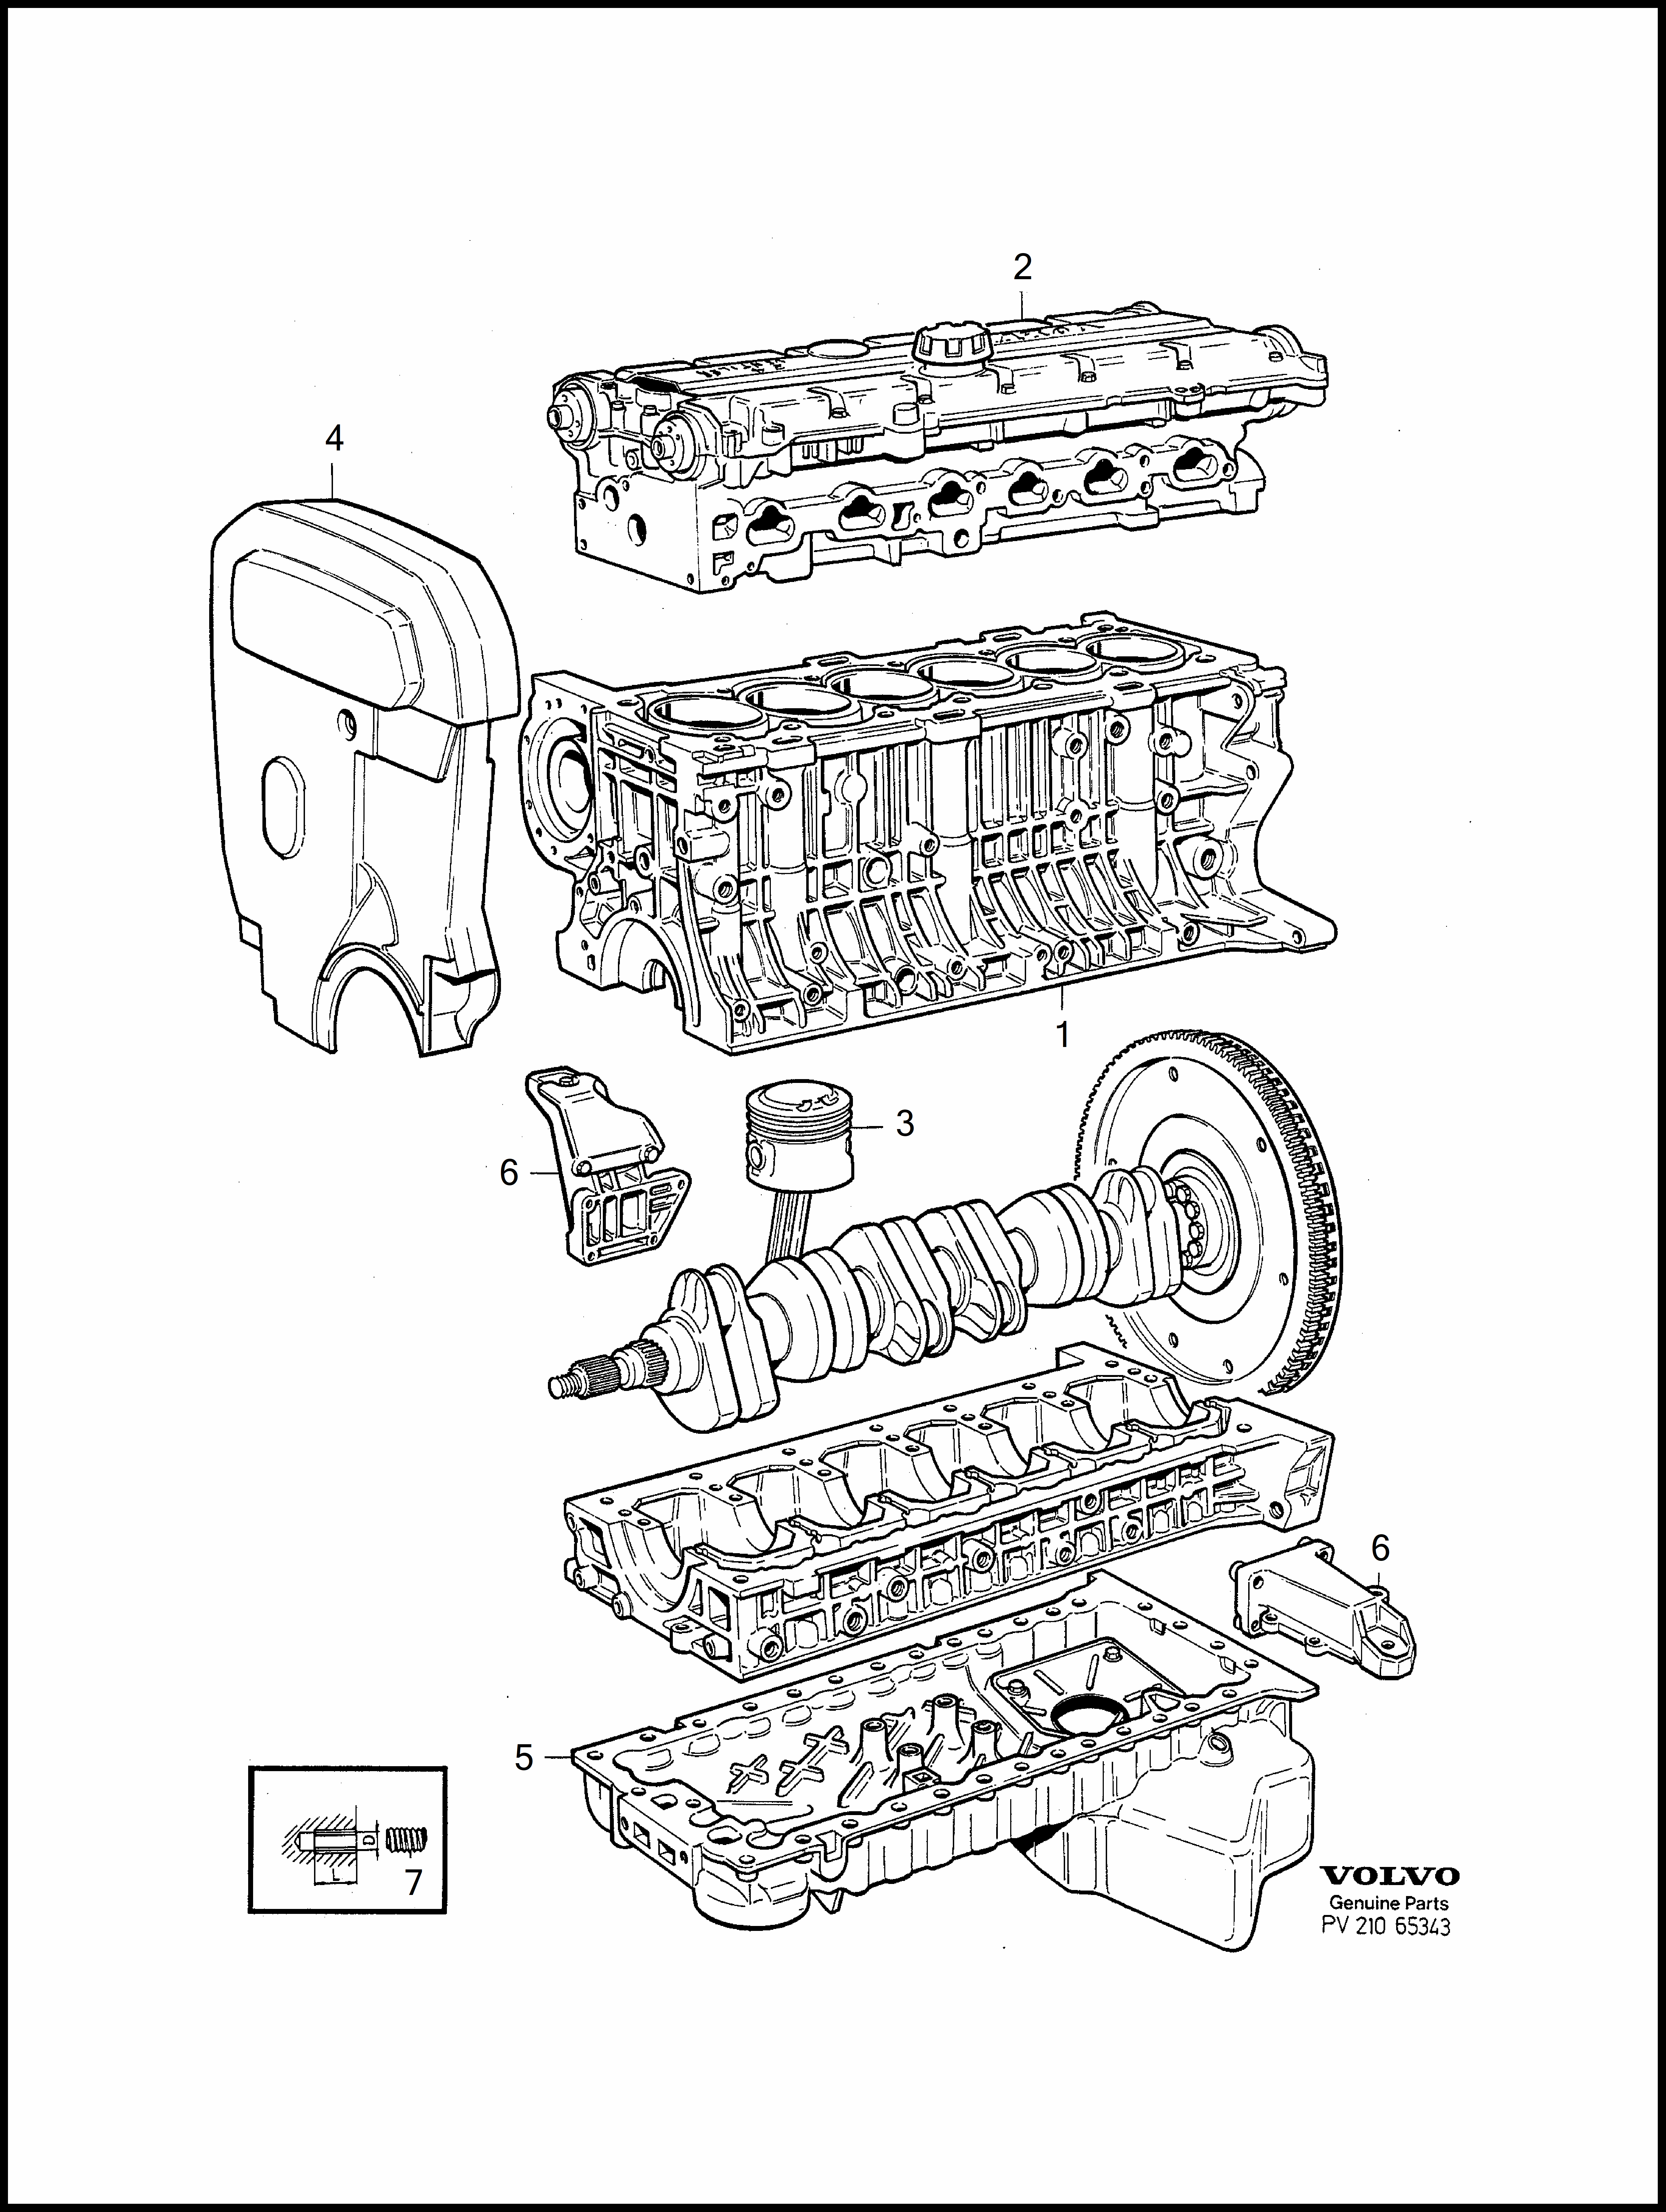 engine with fittings til Volvo 960 960